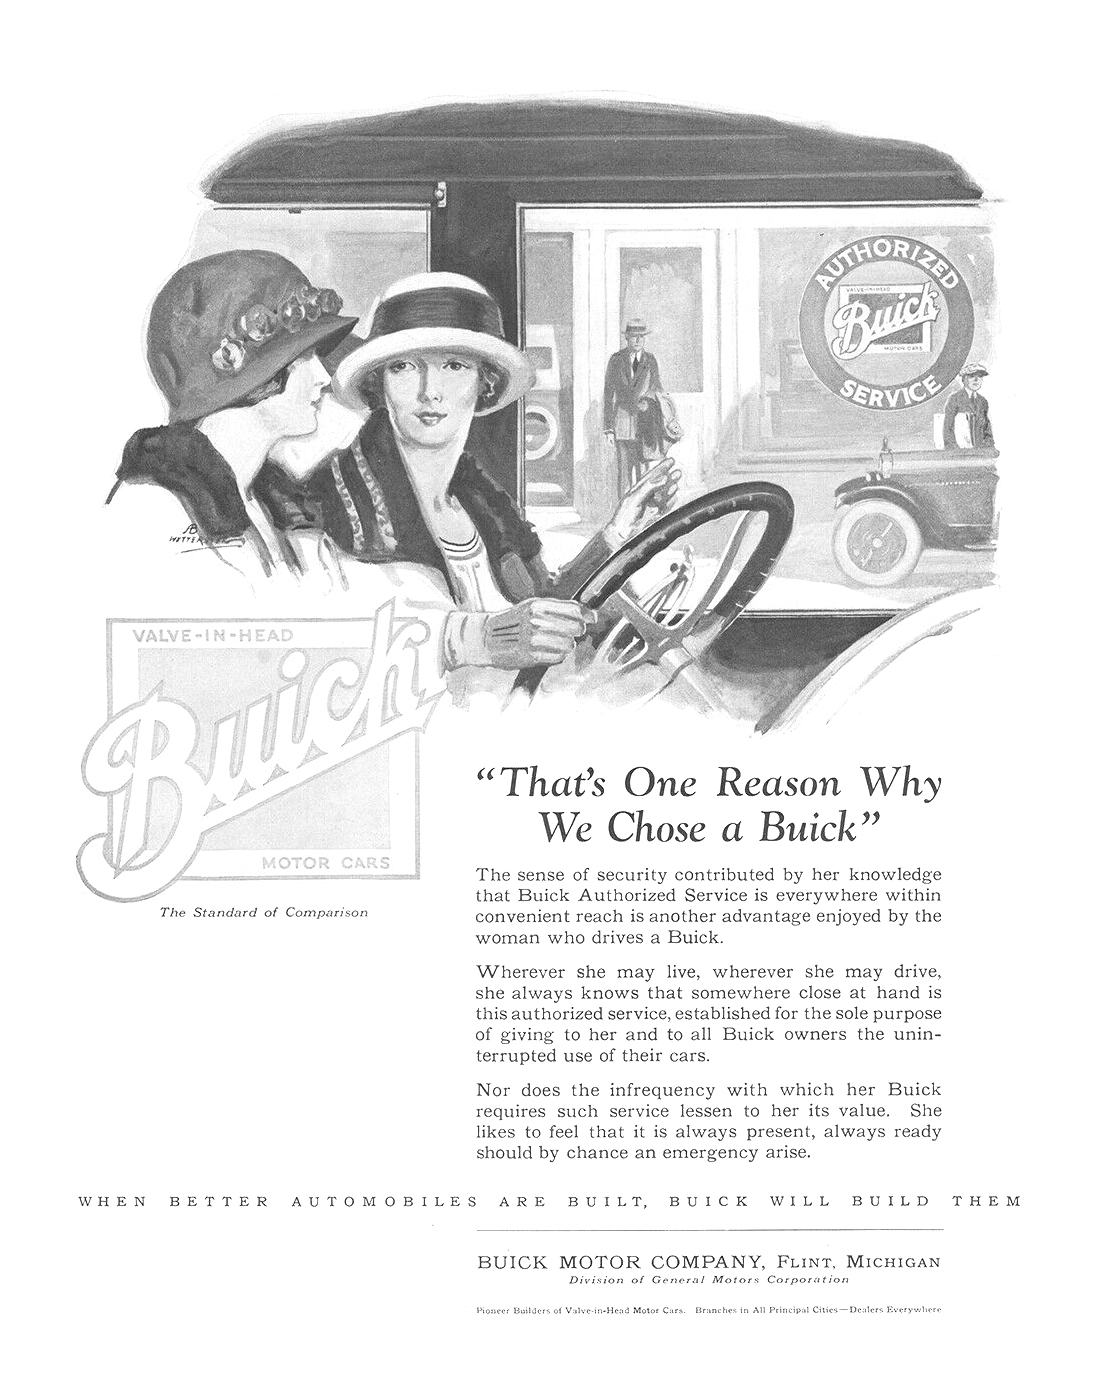 Buick Ad (August, 1923) – "That's One Reason Why We Chose a Buick" – Illustrated by Wettersten